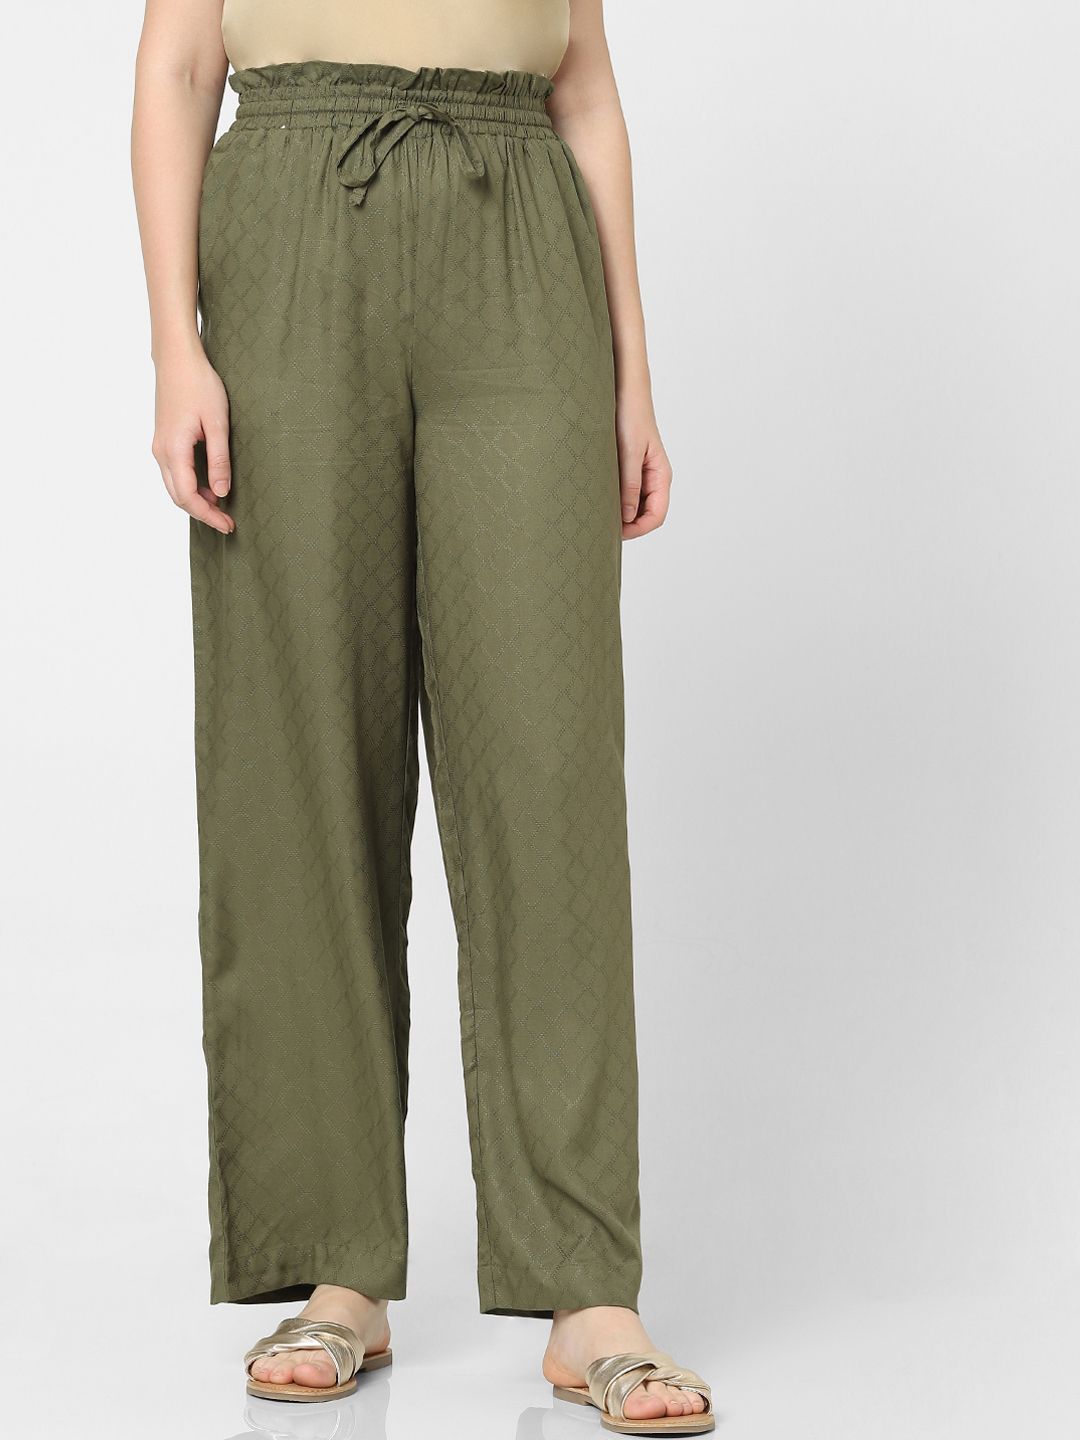 Vero Moda Women Green Straight Fit High-Rise Trousers Price in India